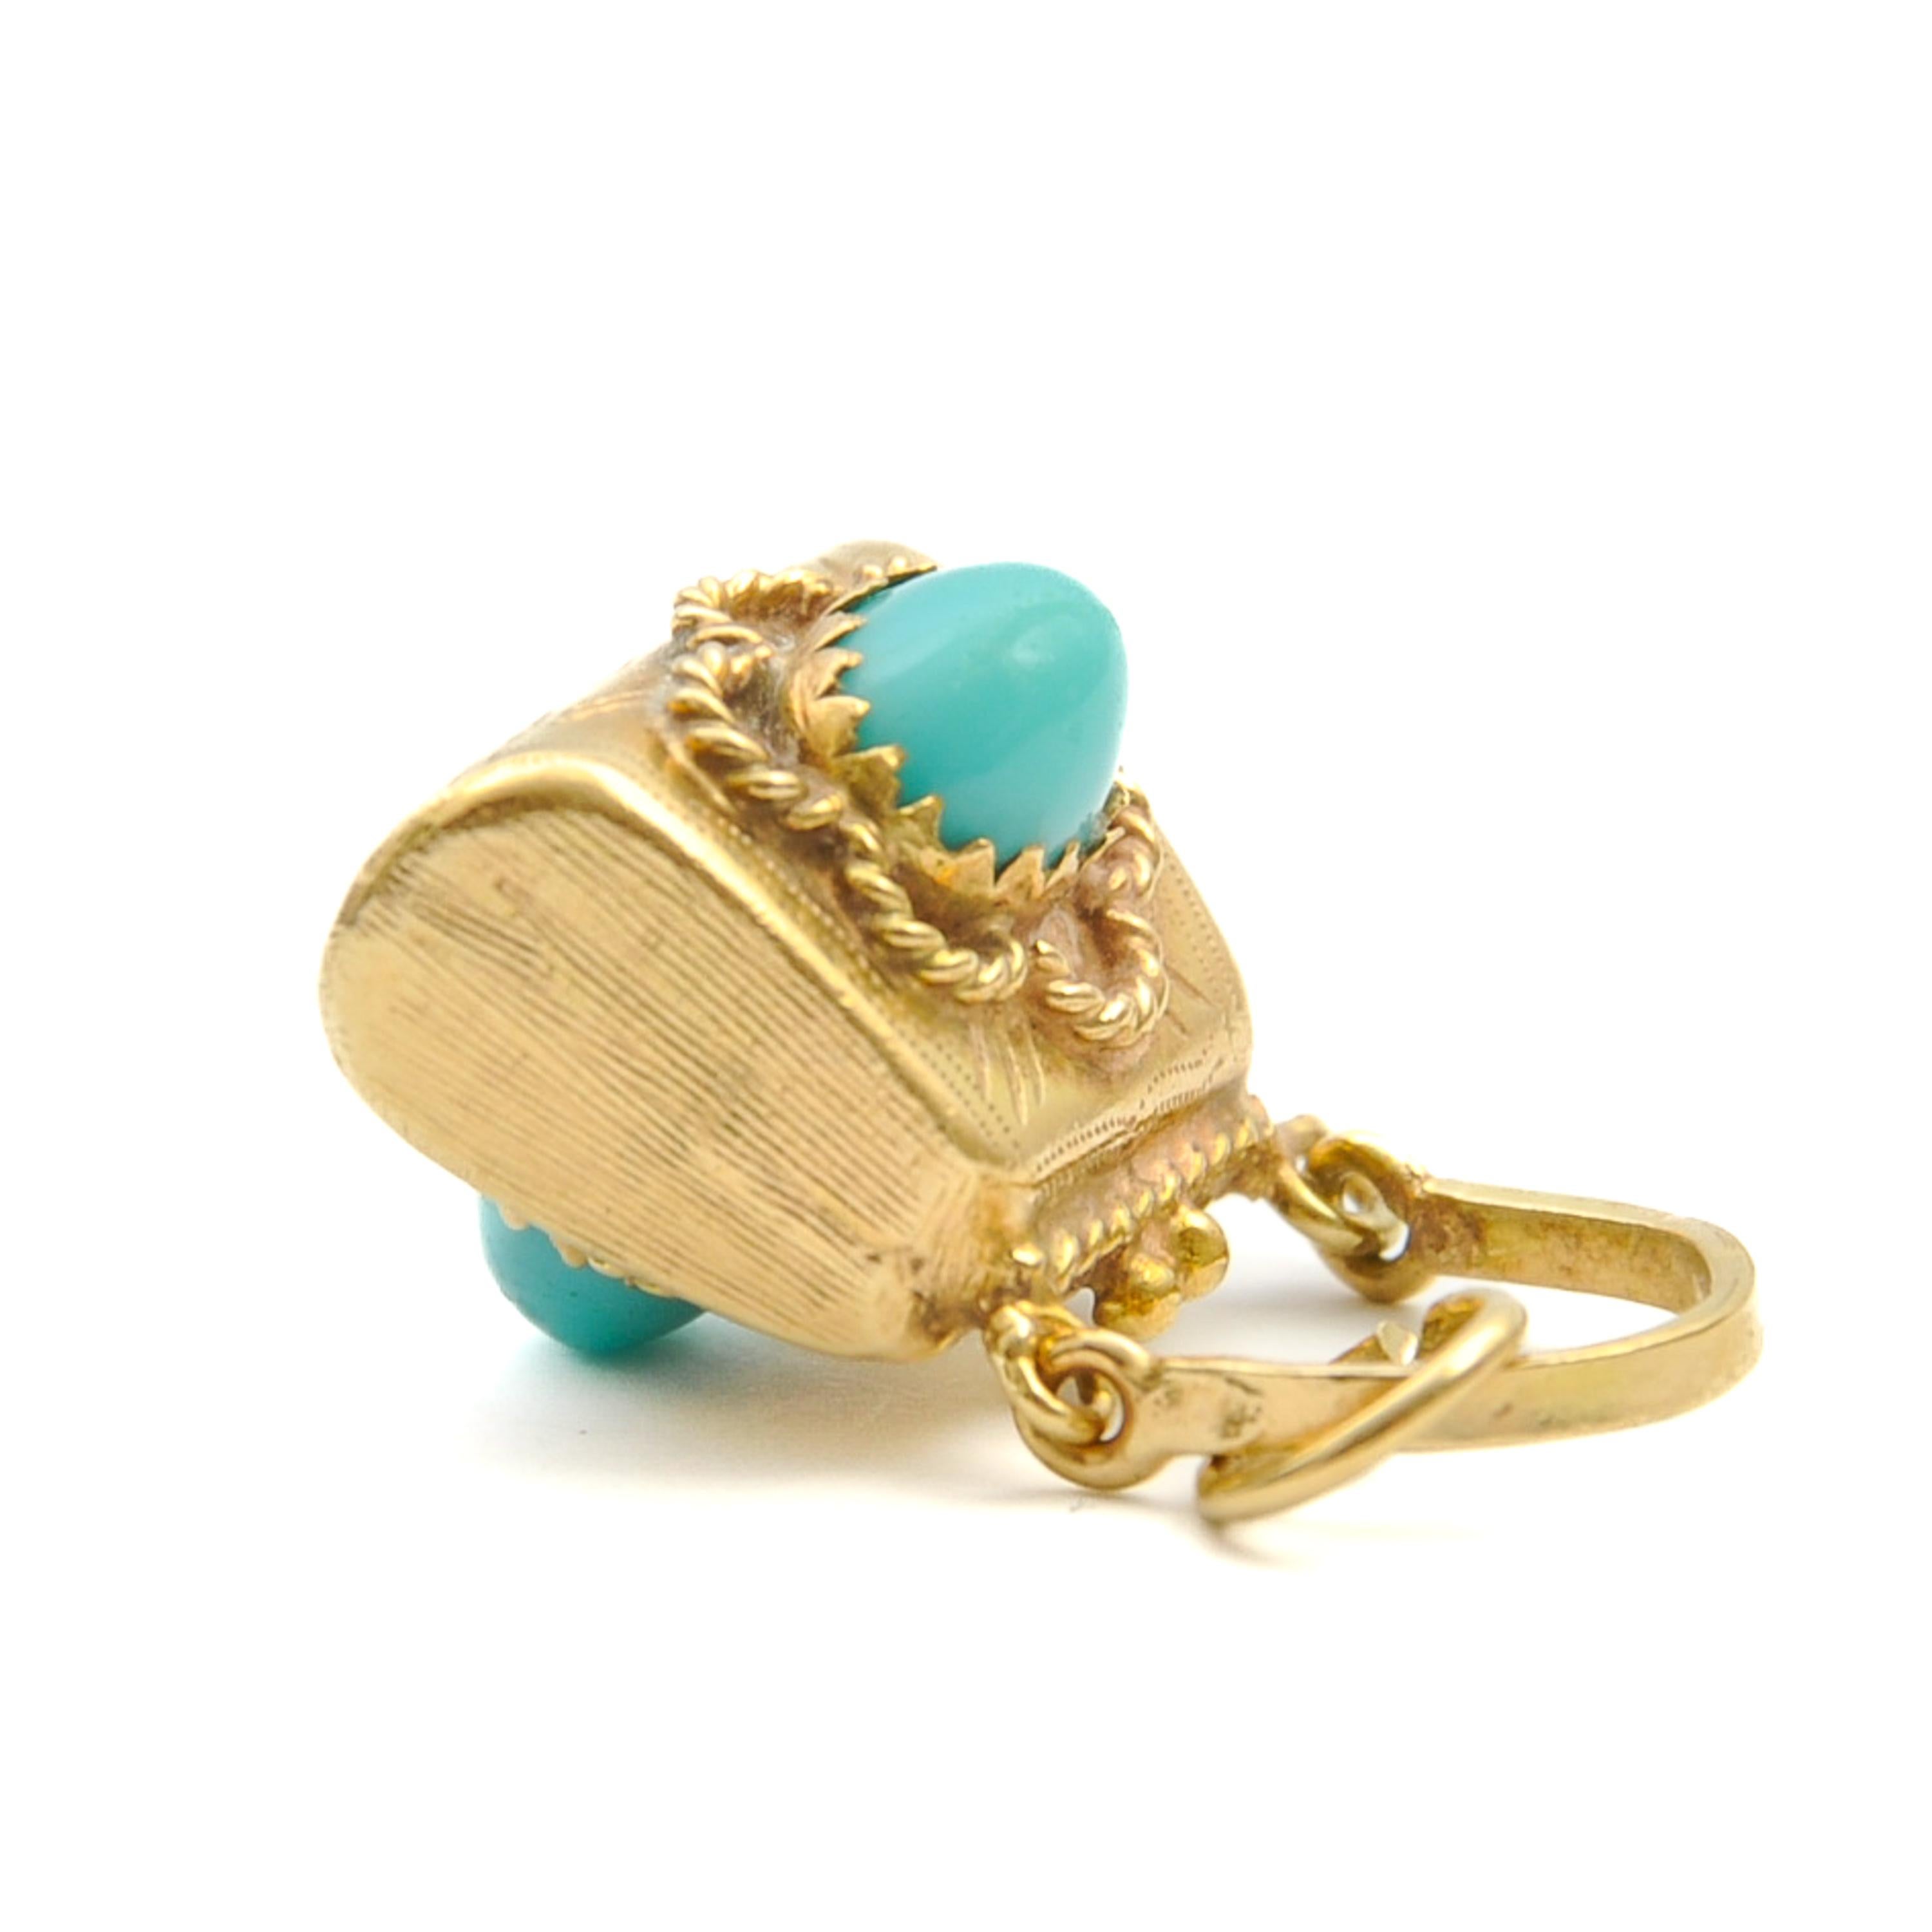 Vintage 14K Gold and Turquoise Purse Charm Pendant For Sale 2